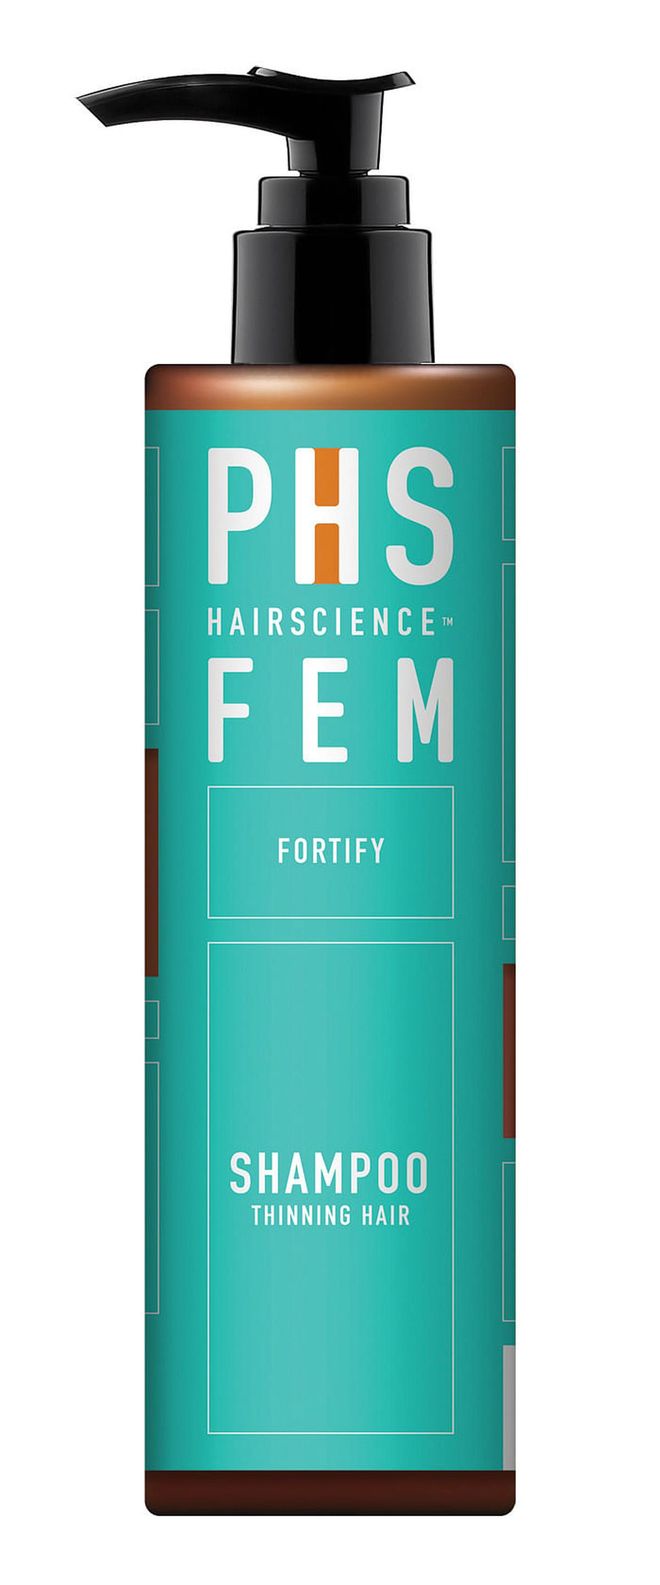 Not all shampoos are created equal. To maintain the health of your hair and scalp, look for a shampoo that gently and thoroughly cleanses. Plus, opt for one that also nourishes and aids repair to support hair regeneration. PHS HAIRSCIENCE’s FEM Fortify Shampoo contains rice stem cells and walnut seed extract to increase blood circulation and regulate the cortex function while nourishing hair roots and repairing damaged hair. As a result, hair loss is halted and follicles are stimulated for healthy hair growth. FEM Fortify Shampoo, $39 for 200ml, PHS HAIRSCIENCE